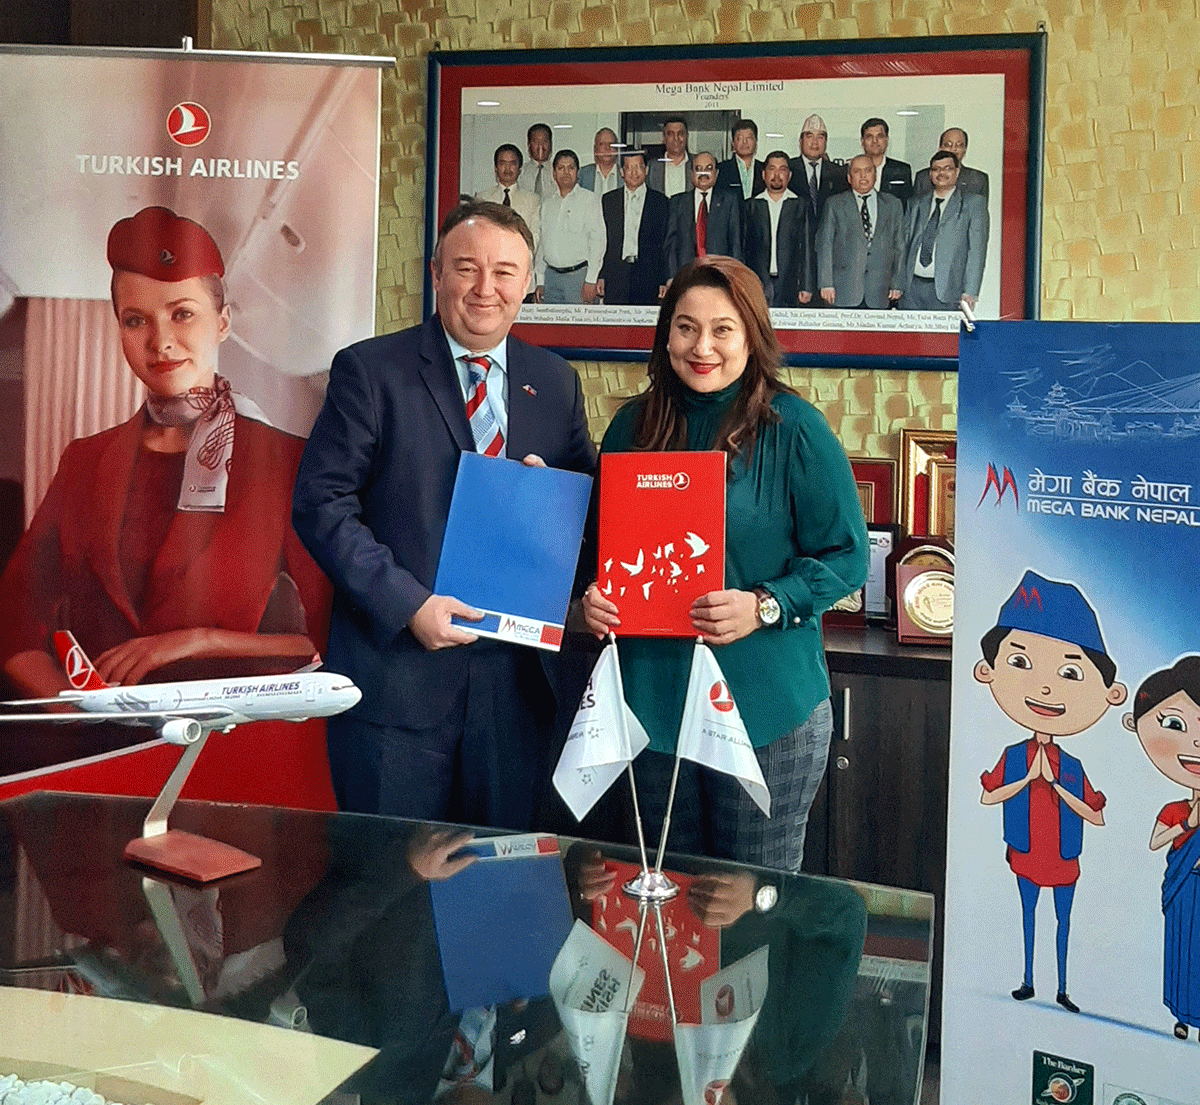 Turkish Airlines partners with Mega Bank Nepal